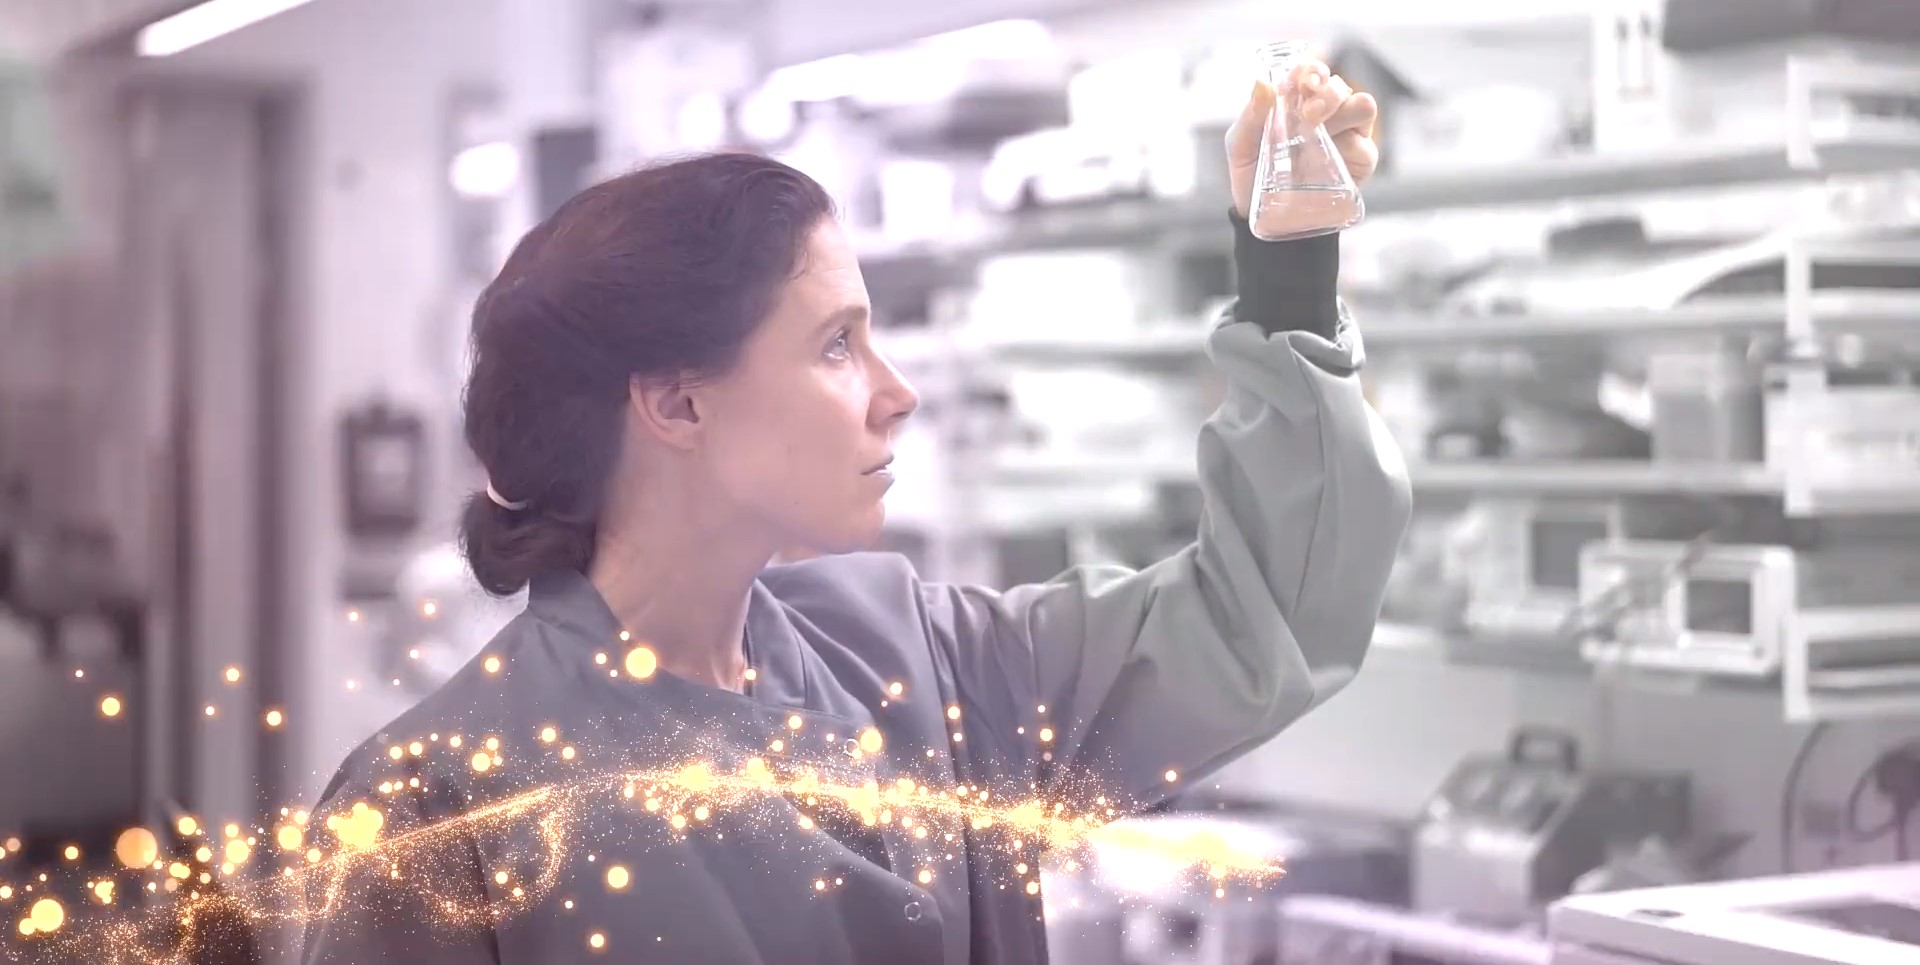 Meet the scientist delivering a treatment revolution - with bubbles